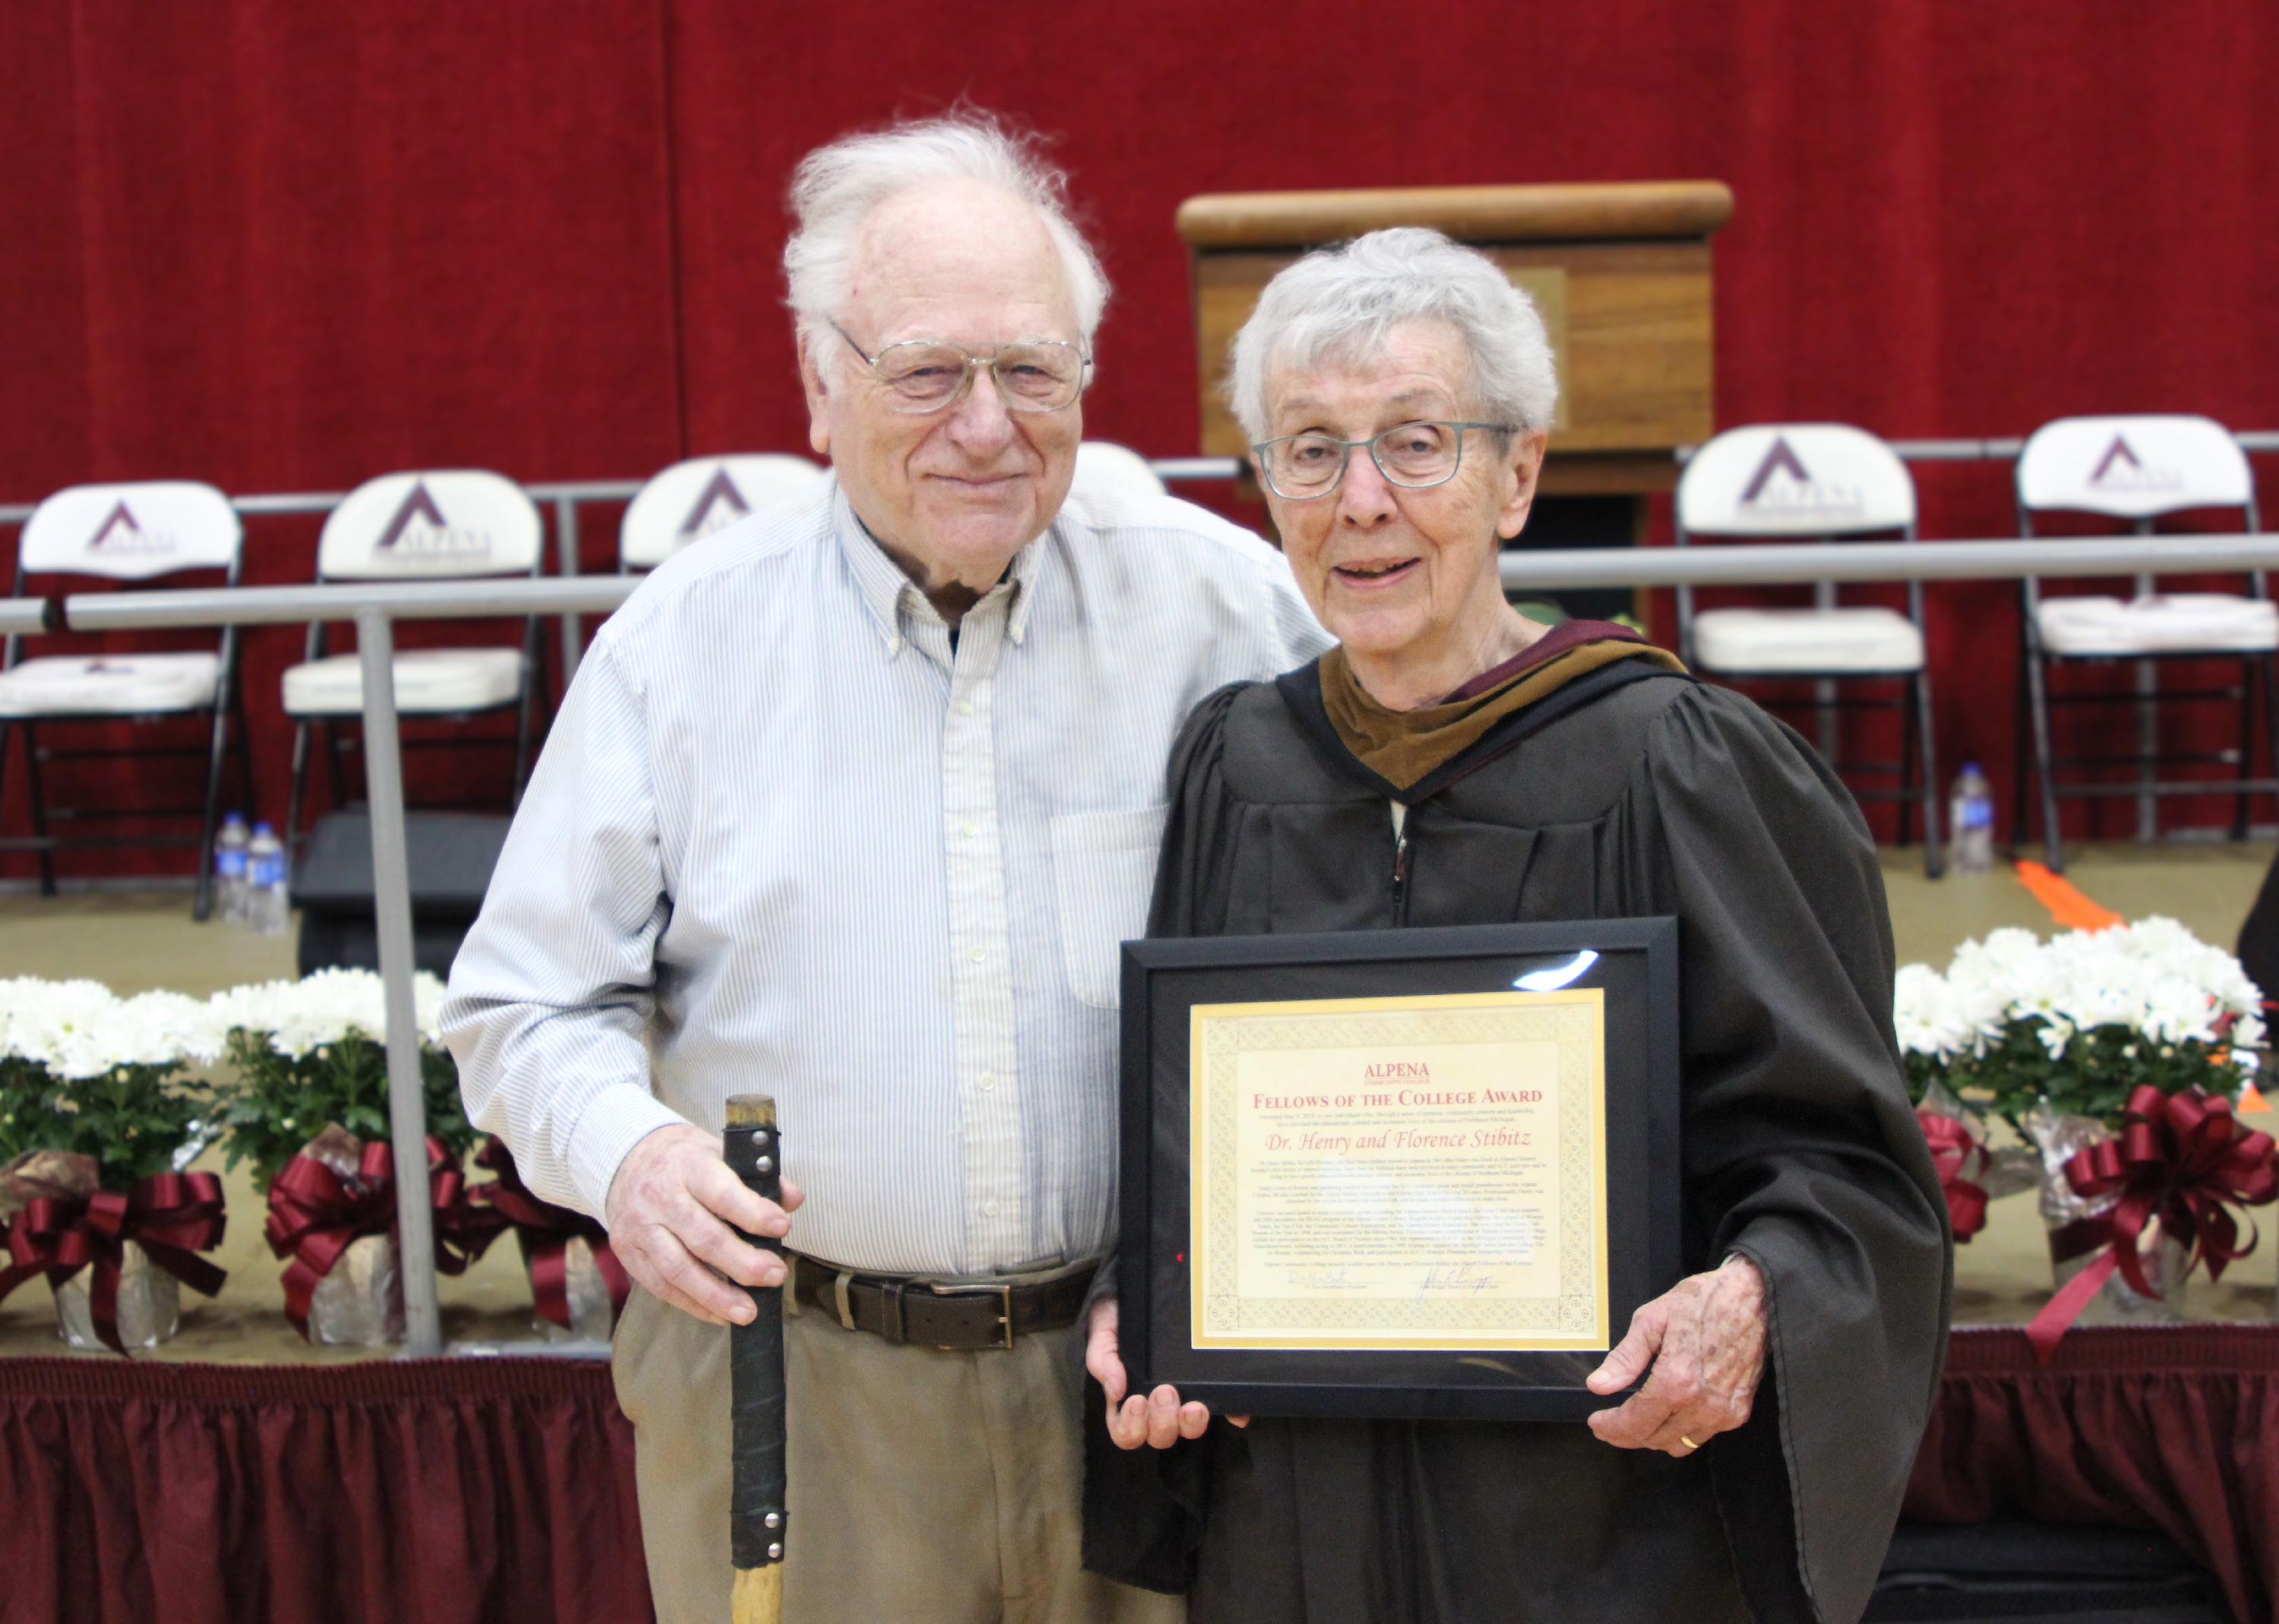 Dr. Henry and Florence Stibitz pose with their award at Graduation